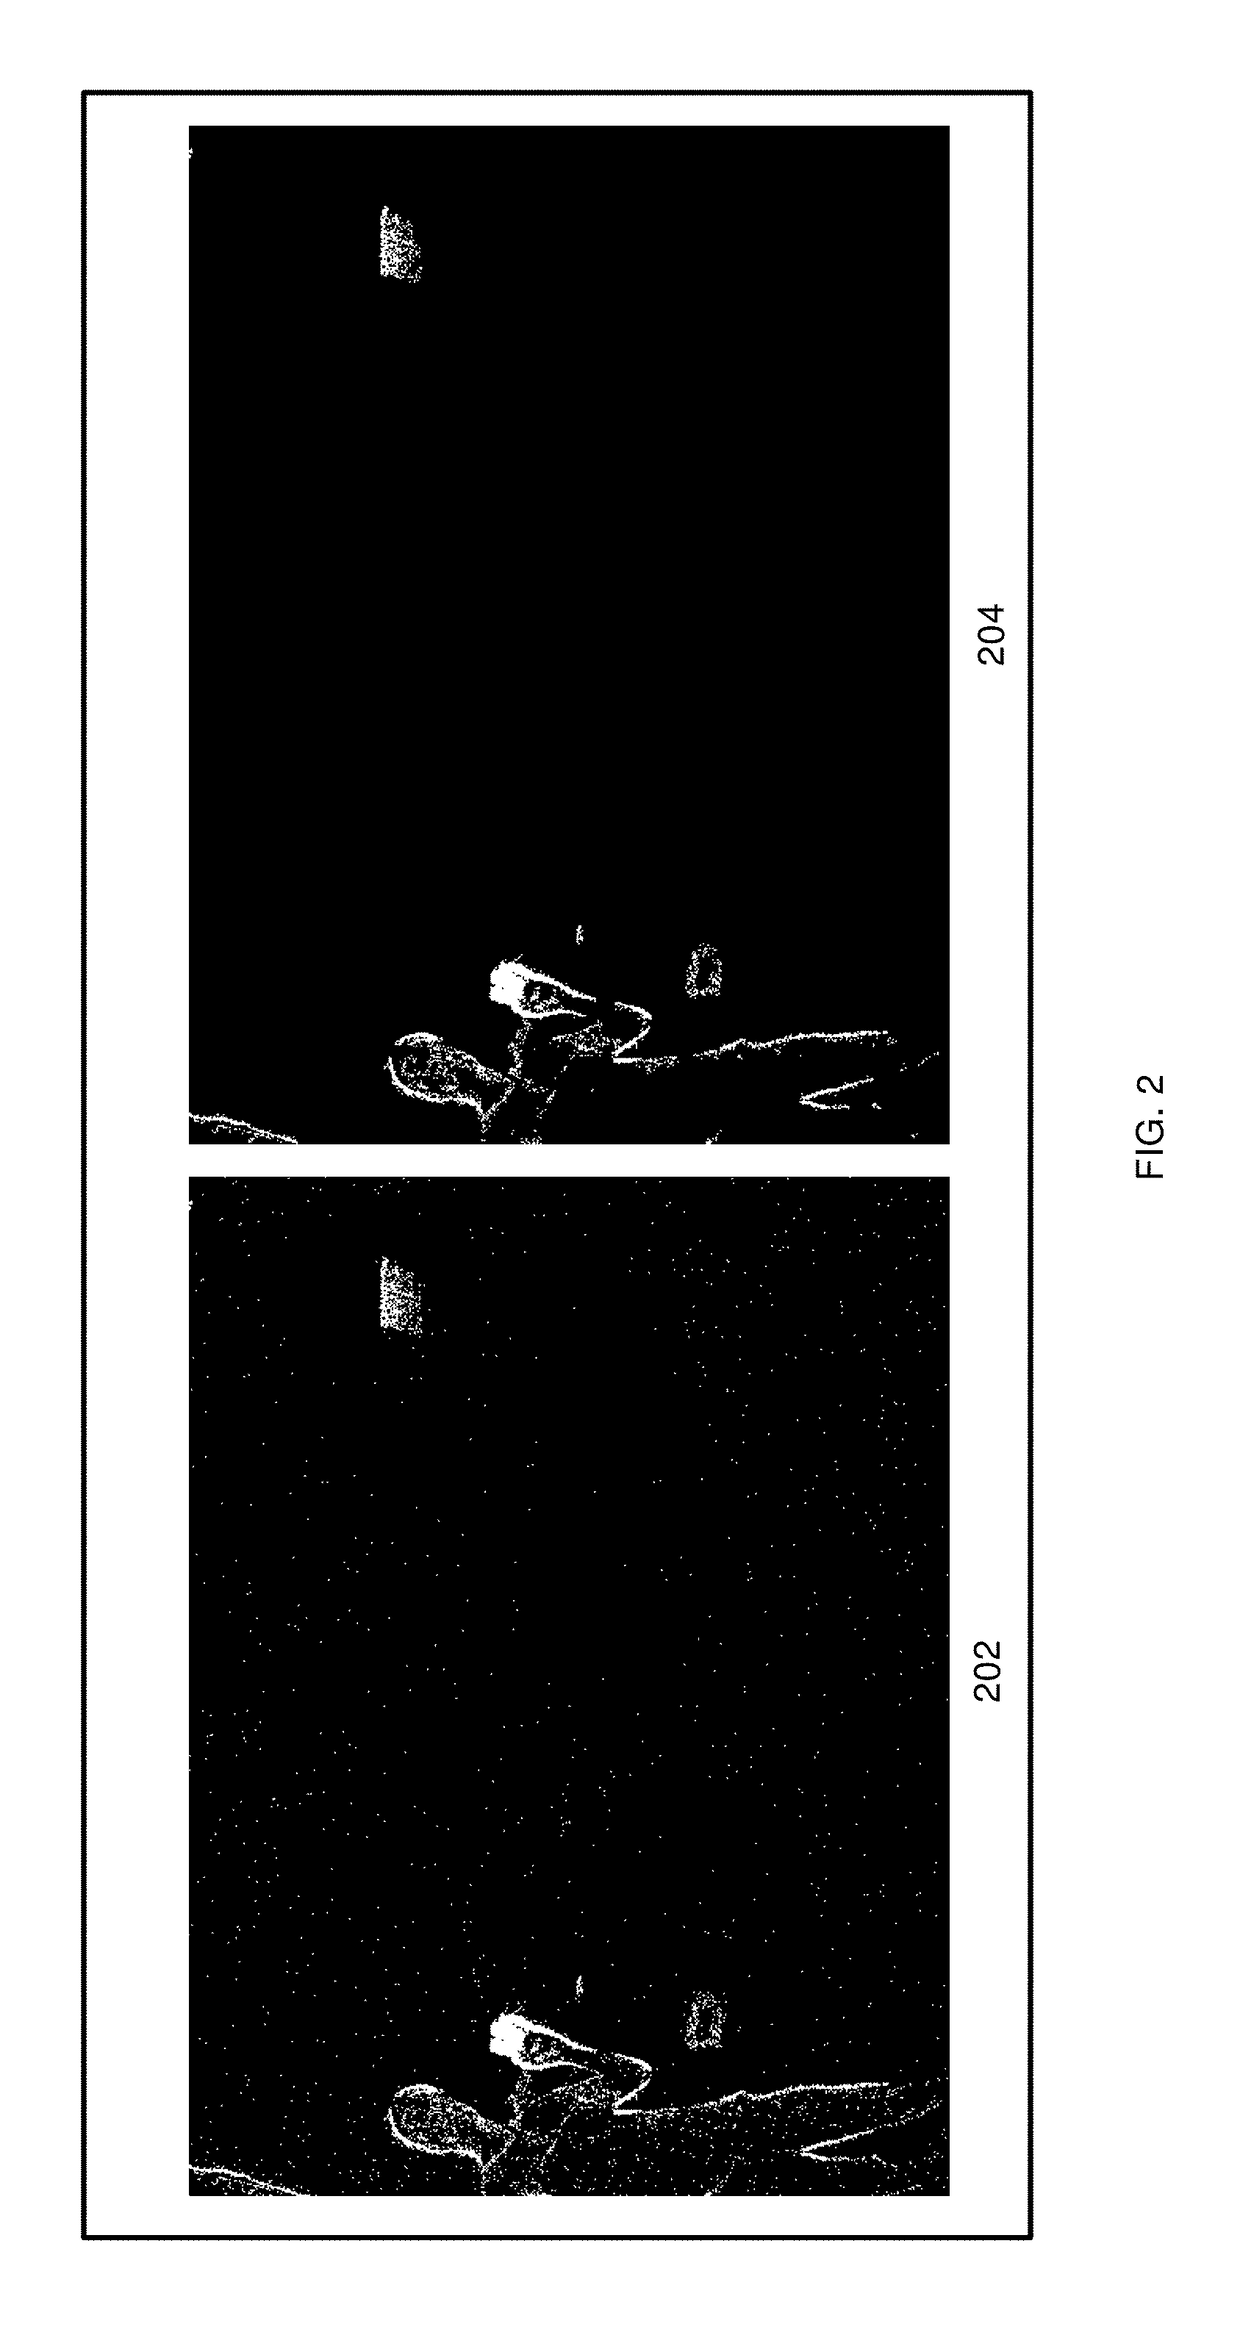 Image vision processing method, device and equipment